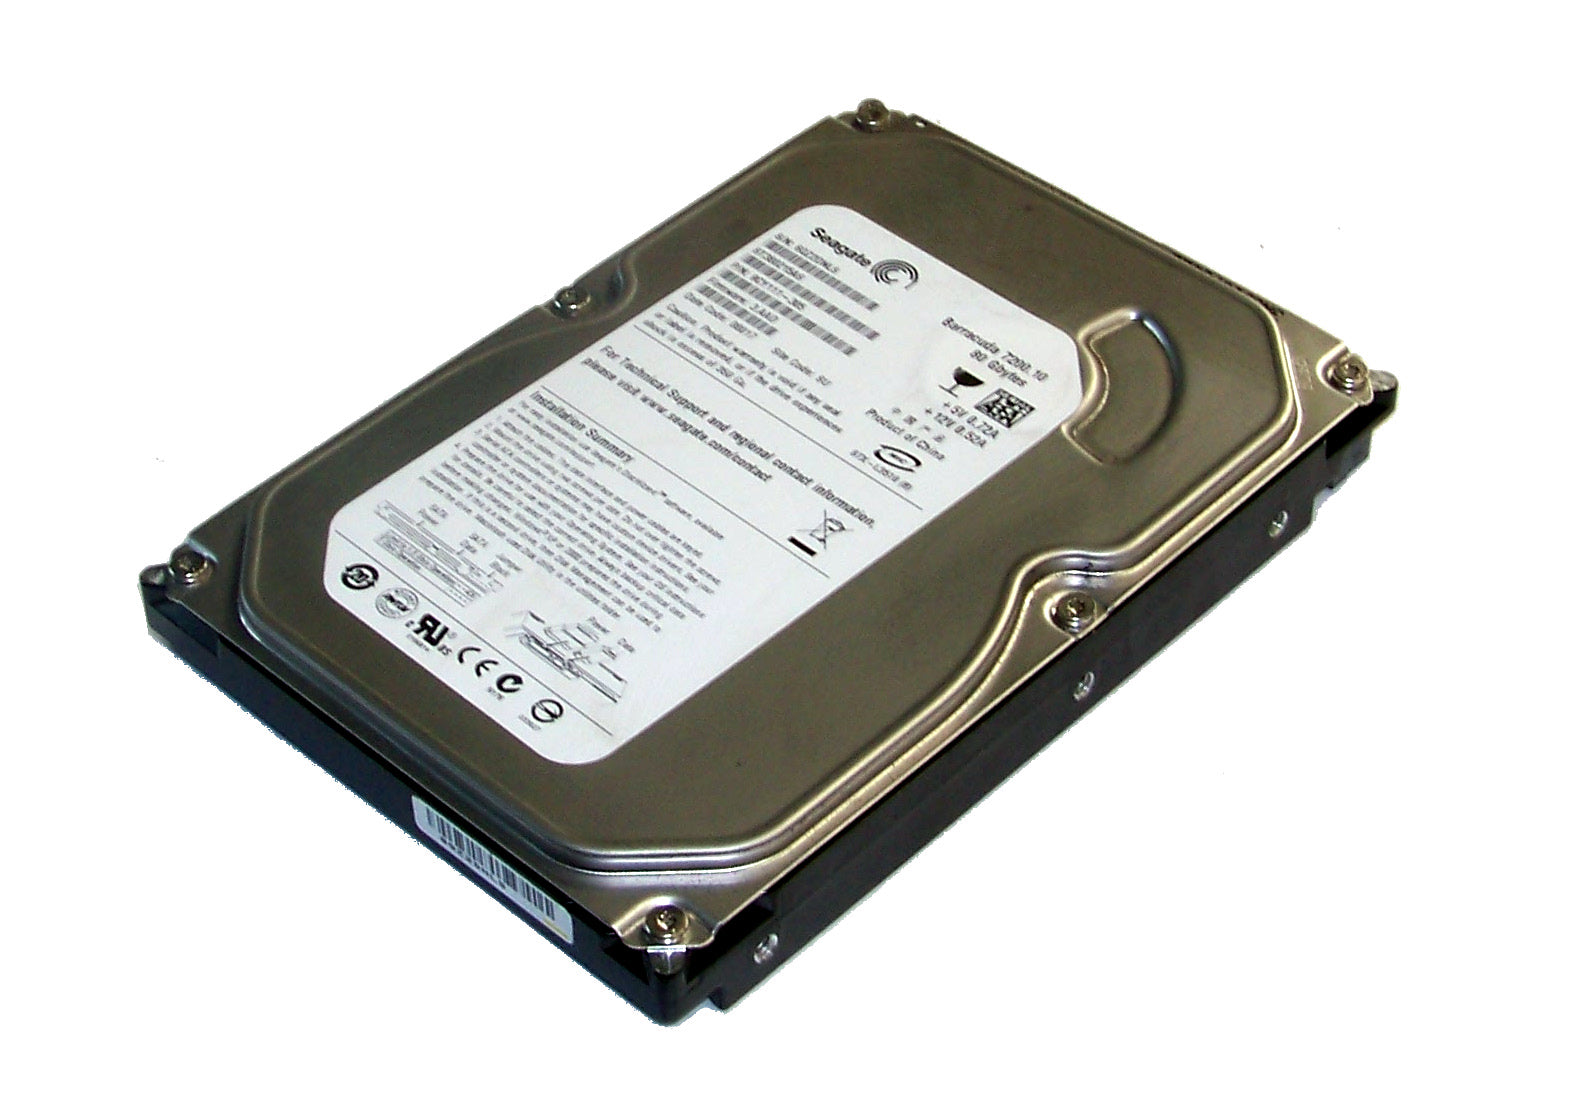 Seagate 80Gb SATA 7200rpm 3.5in HDD ( 9CY111-305 ST380215AS ) USED